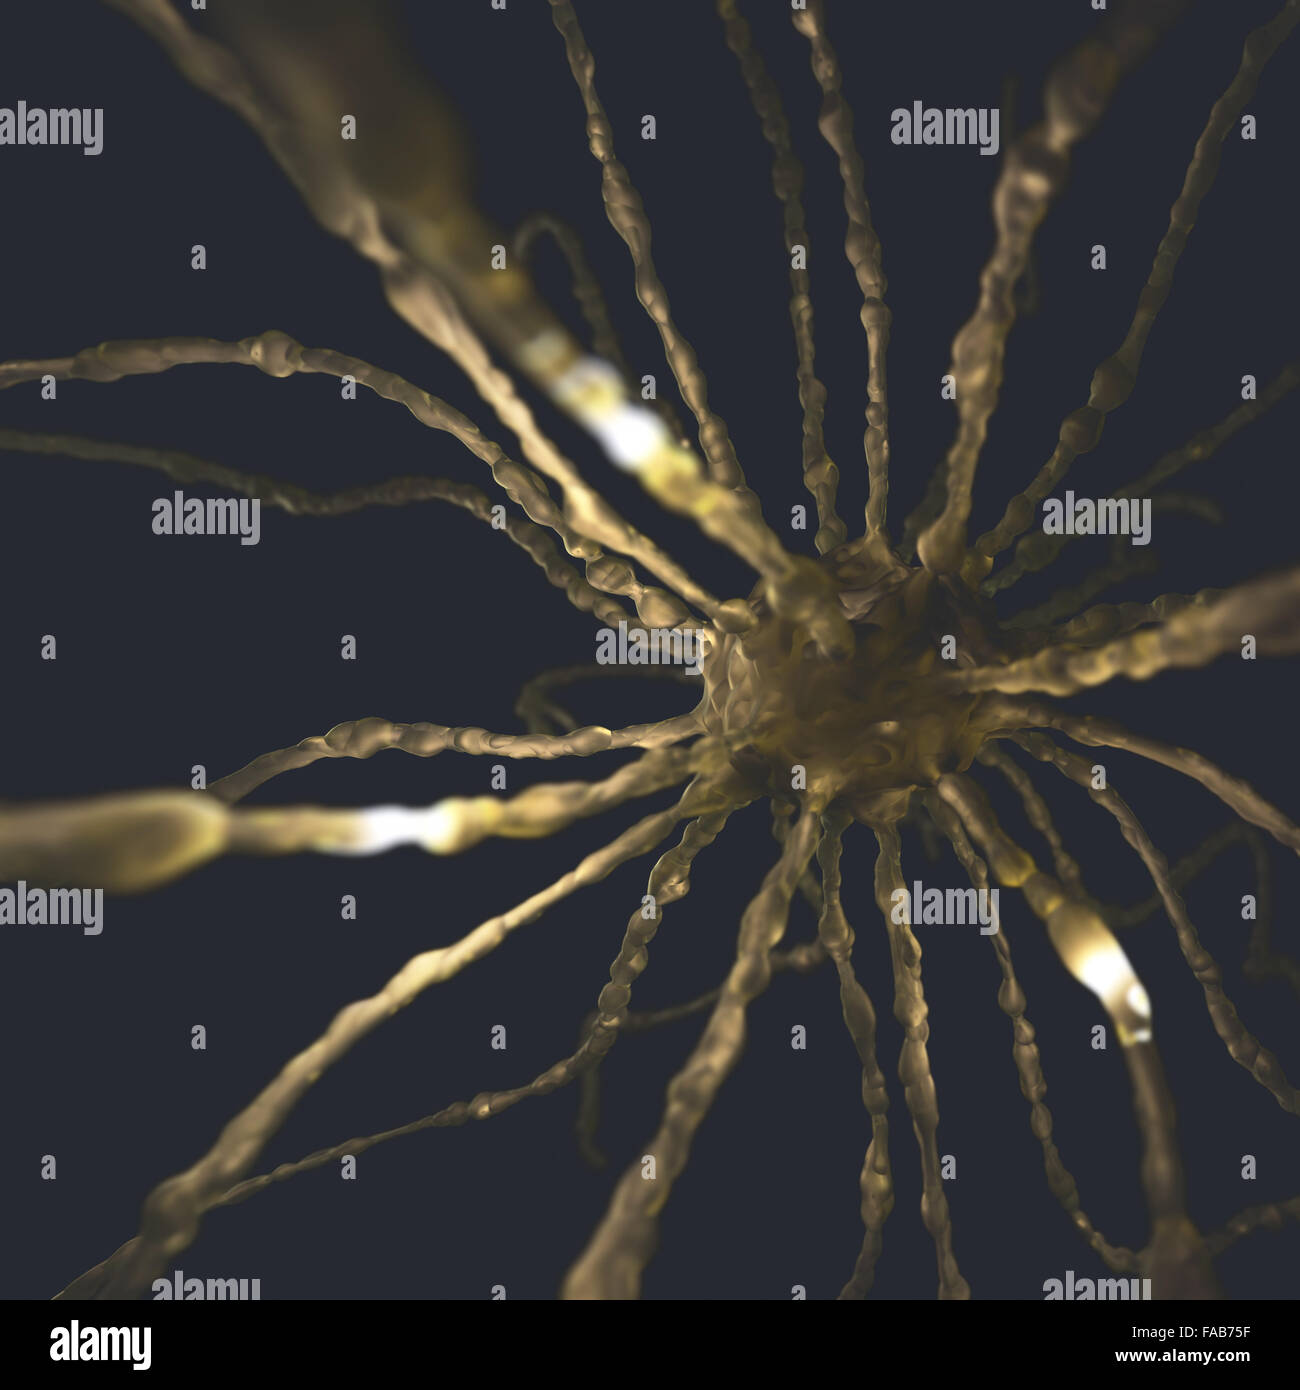 Image concept of neurons interconnected in a complex brain network. Stock Photo